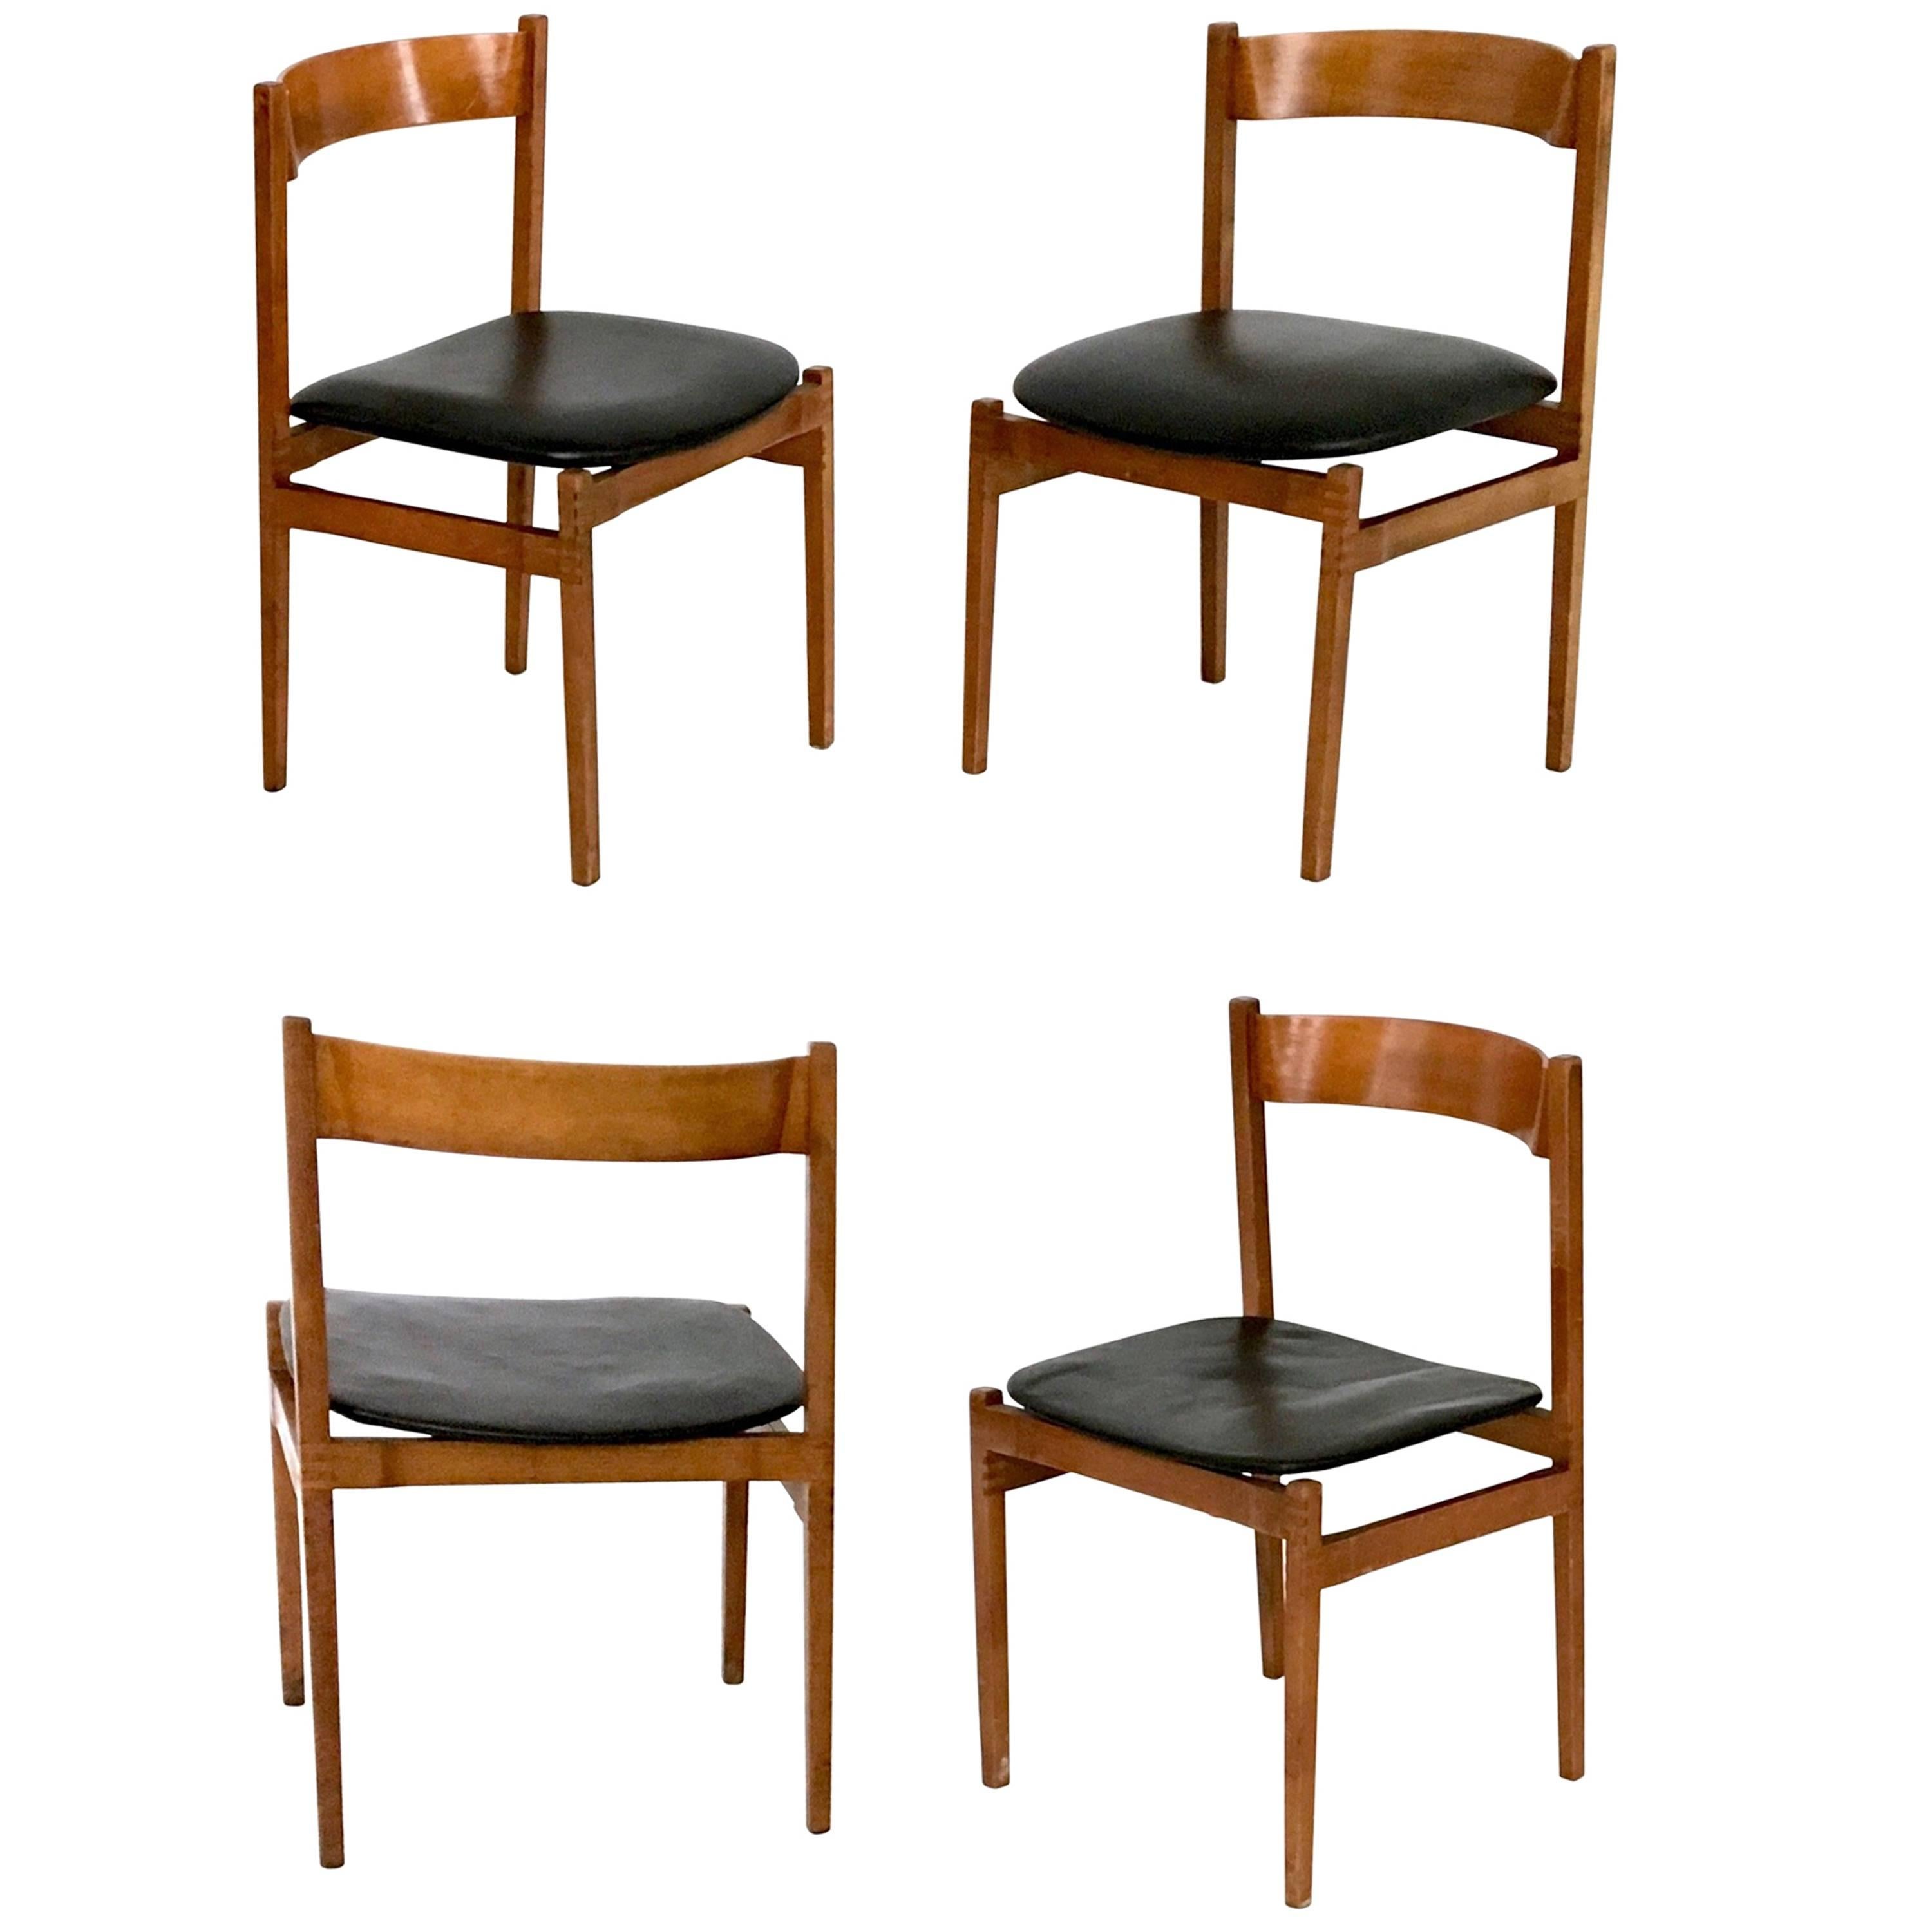 Set of Four Chairs by Gianfranco Frattini for Cassina, 1950s